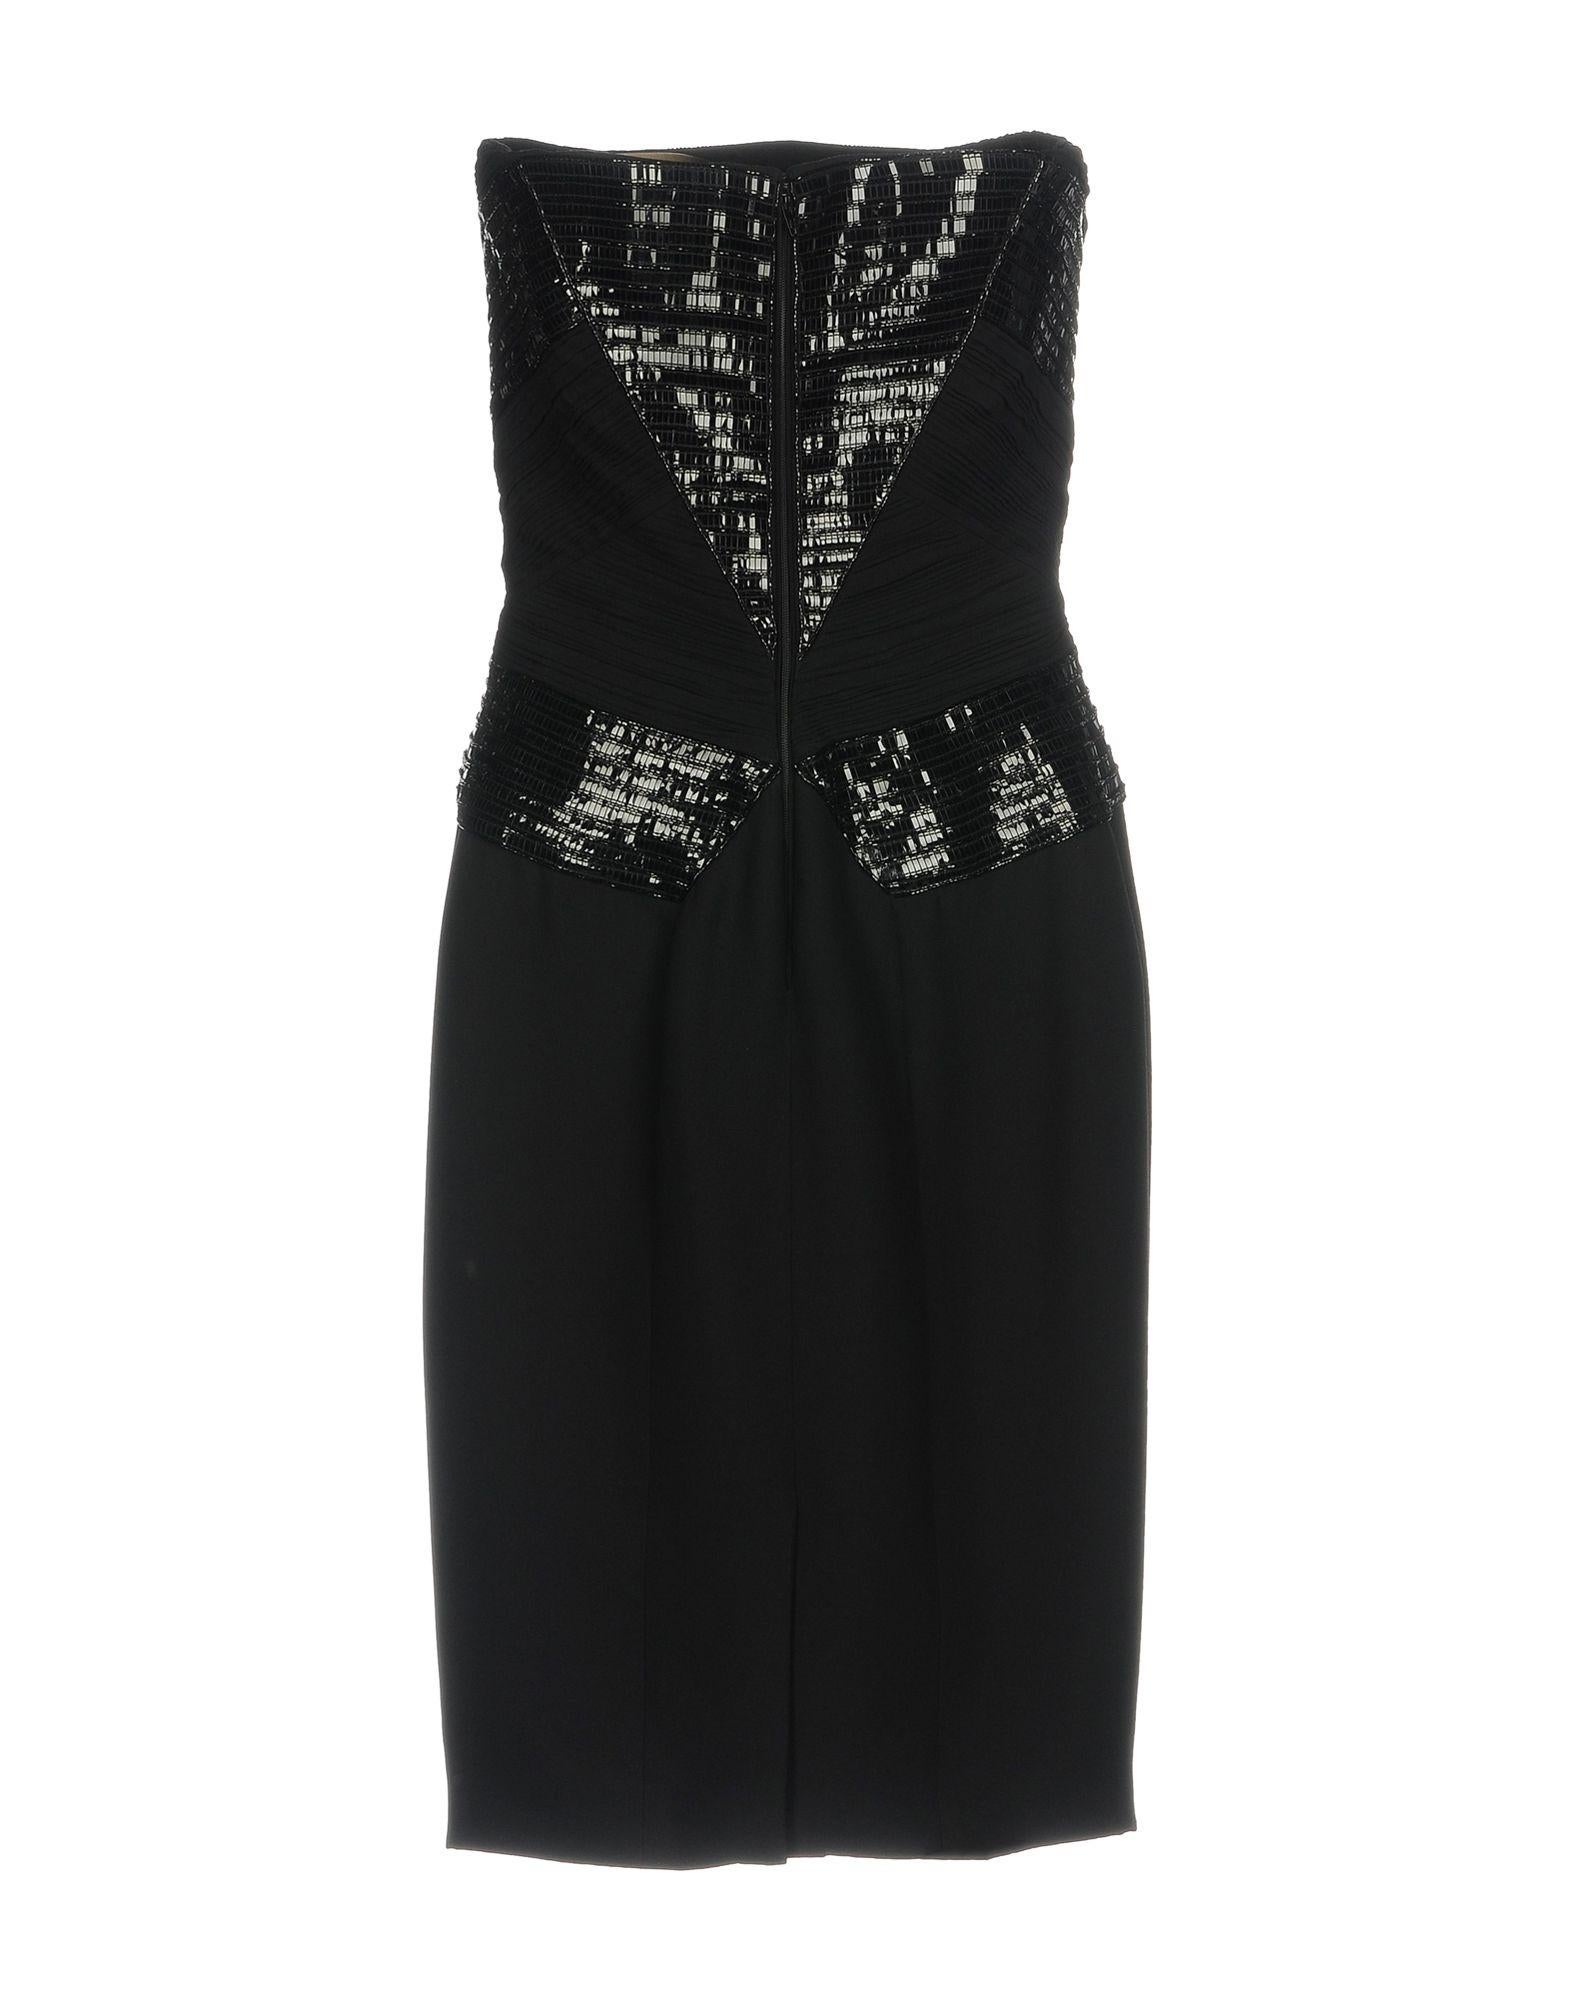 New Versace Patent Leather Embellished Silk Black Cocktail Strapless Dress 40 For Sale 8